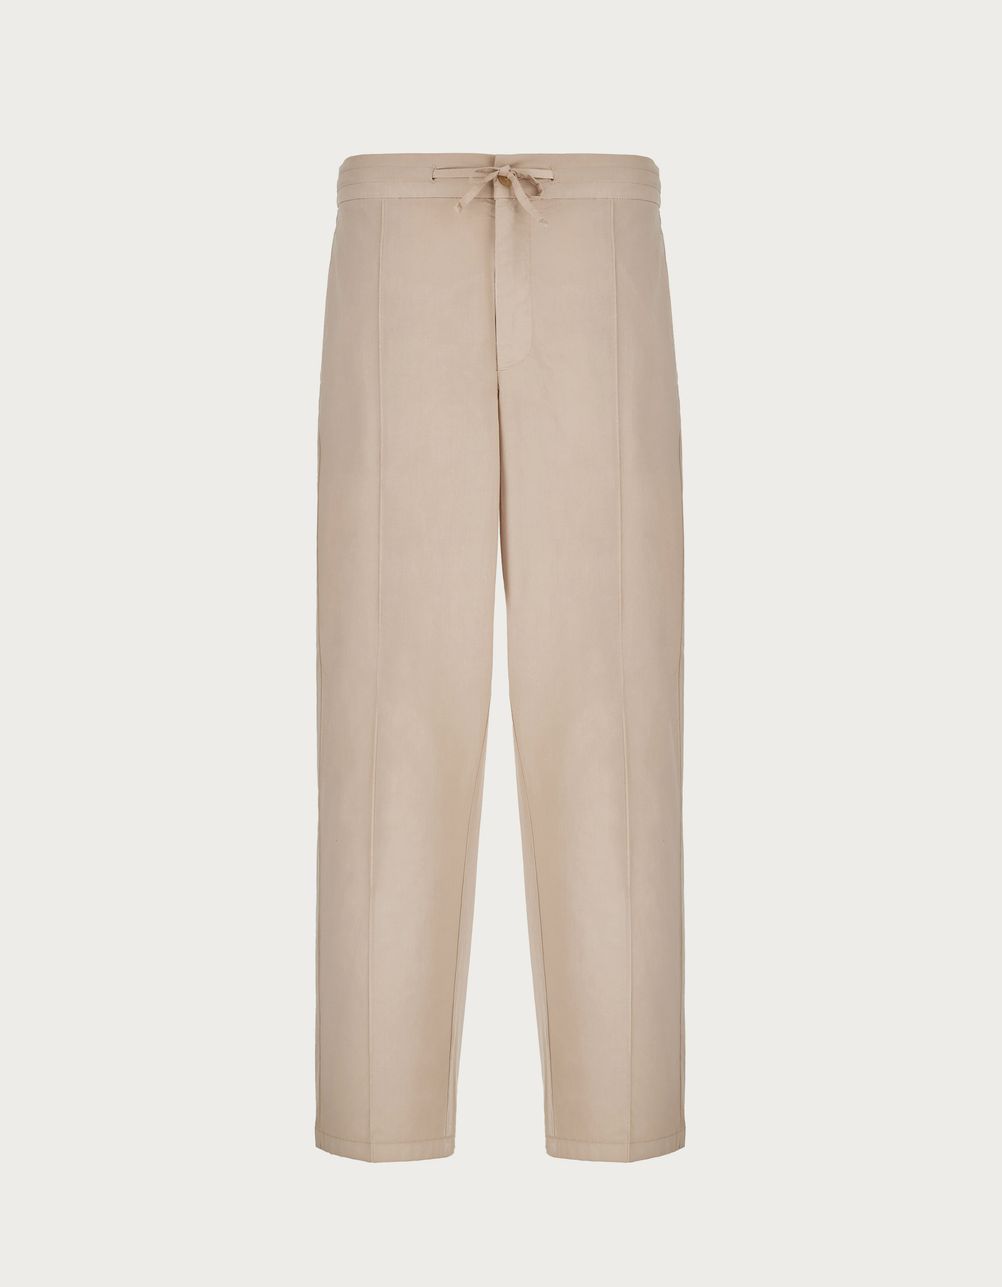 Chinos with drawstring in sand garment-dyed cotton muslin